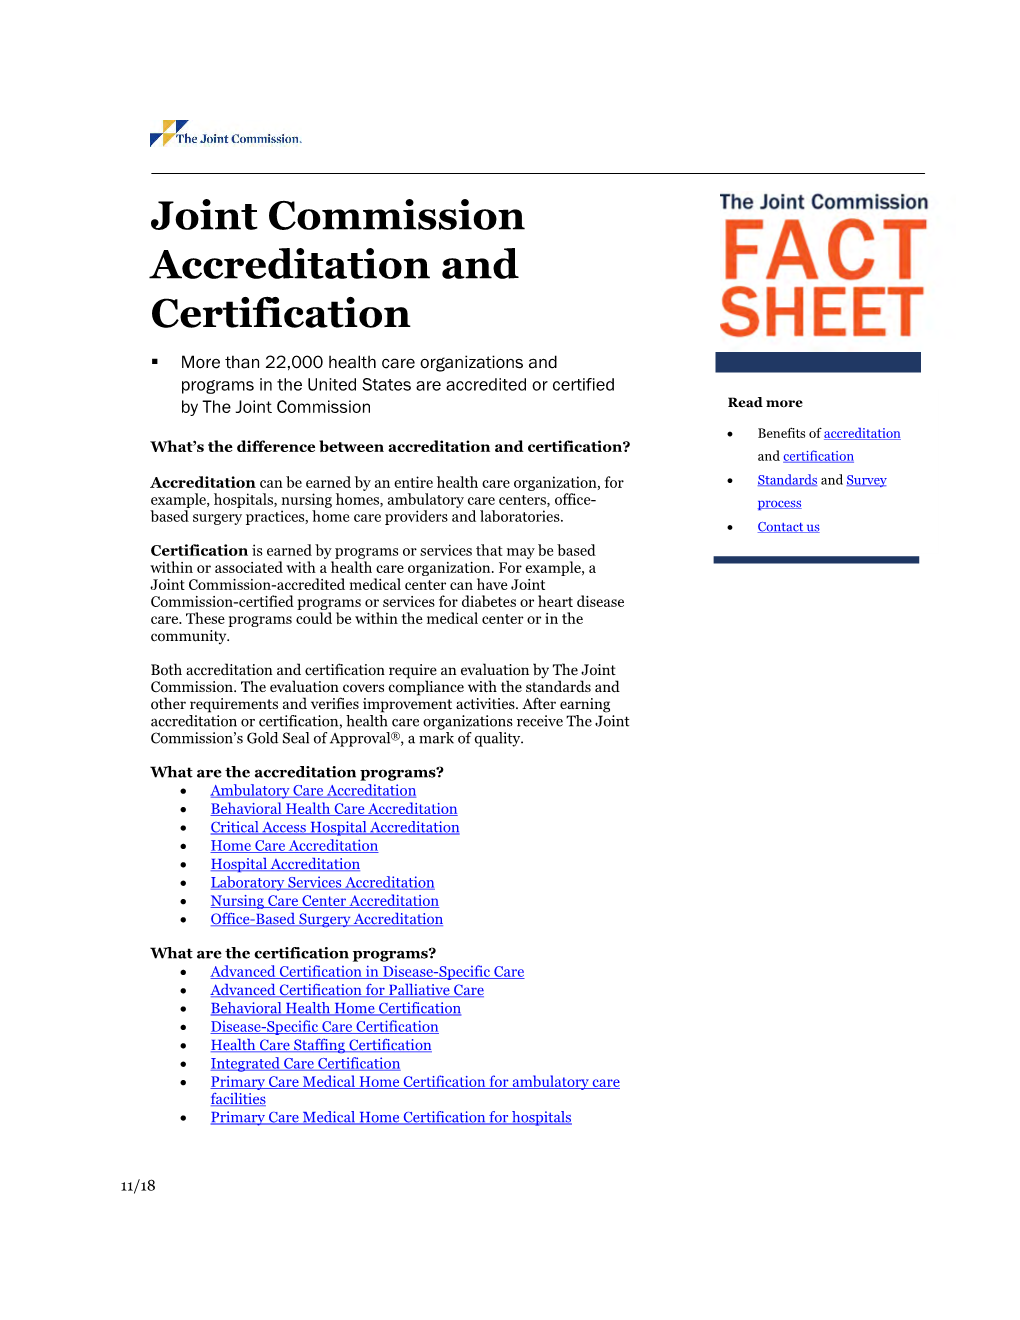 Joint Commission Accreditation and Certification